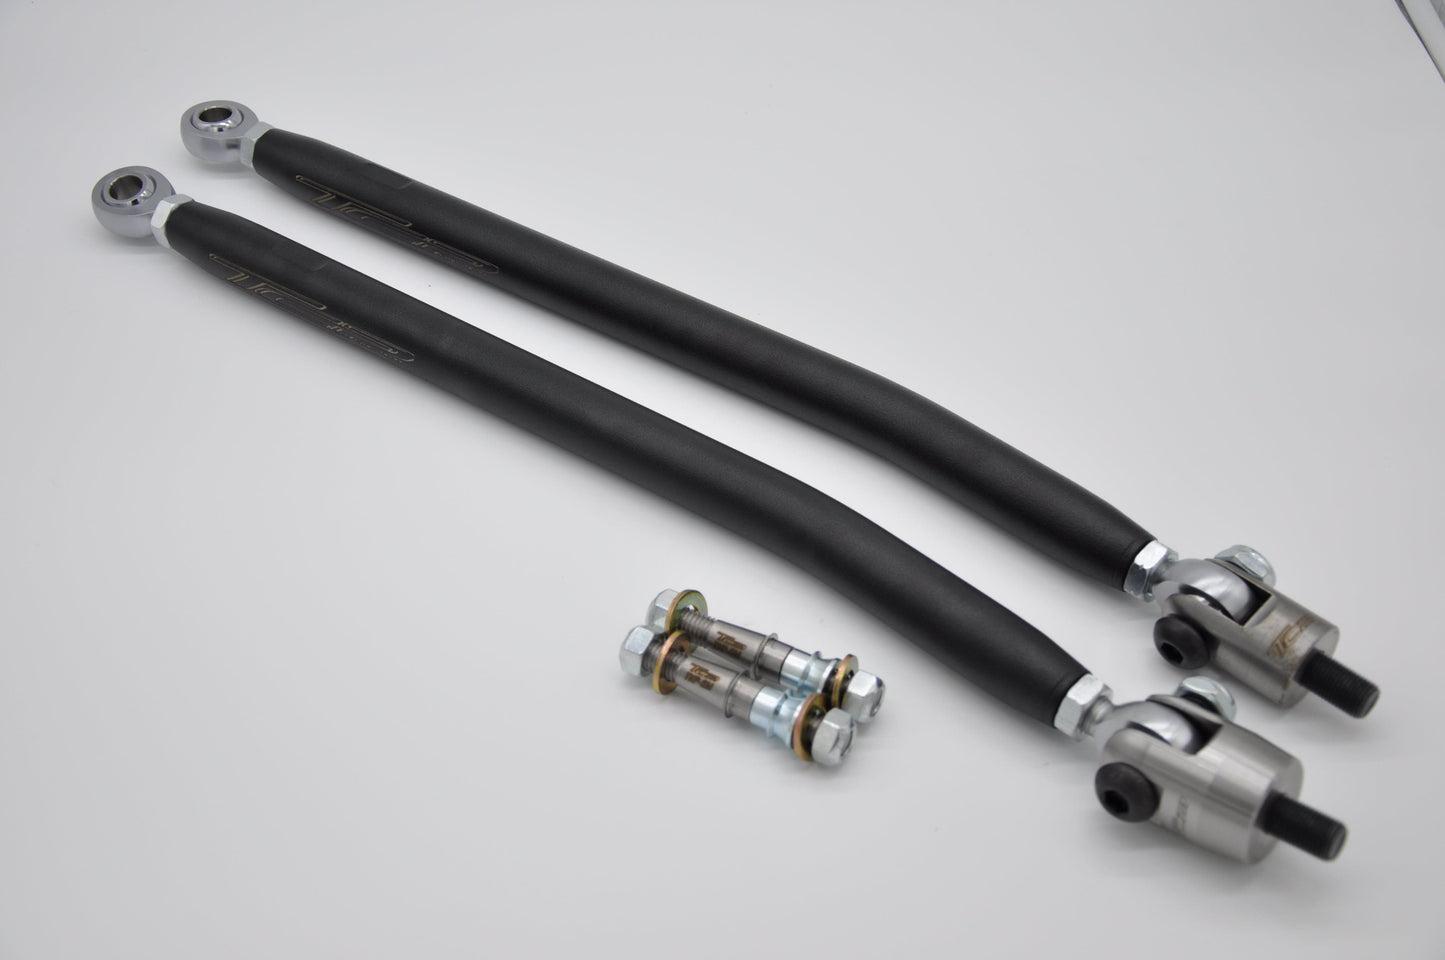 TCP Xtreme "XXX" Polaris RZR Turbo Heavy Duty Billet Steering Rack and Pinion (Rack, Clevis and Tie Rod Kit)